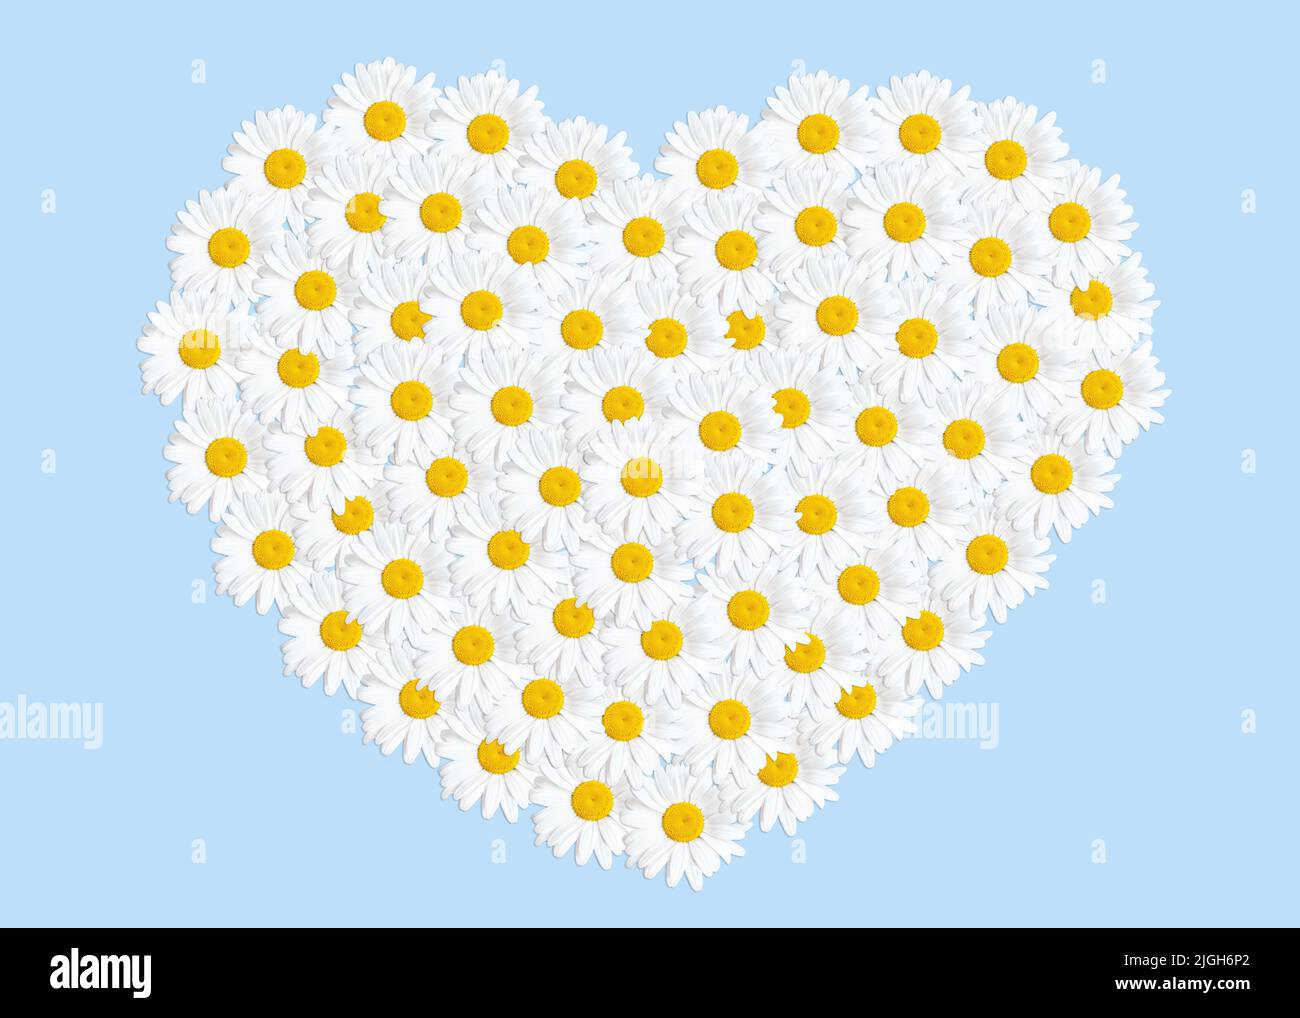 Filled heart shape made from white camomiles isolated on blue. Romantic springtime background. Stock Photo